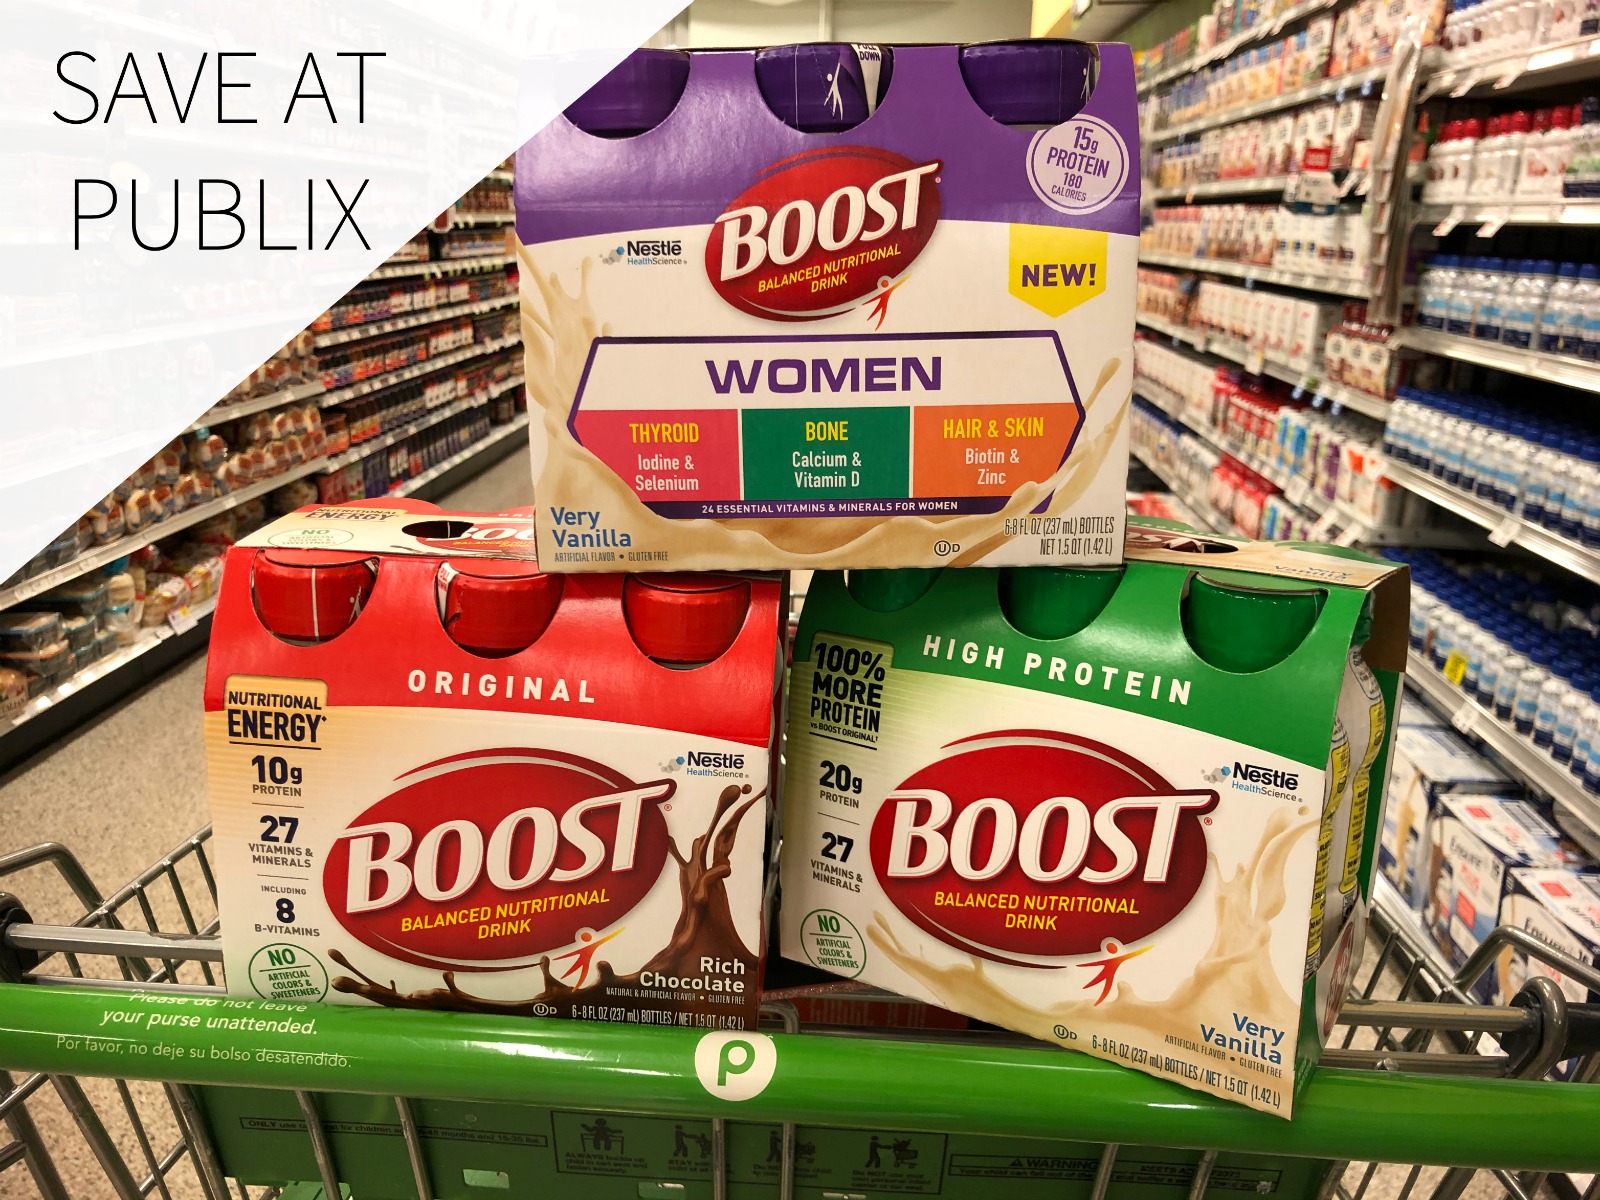 Stock Up On Your Favorite BOOST® Nutritional Drinks – On Sale Now At Publix